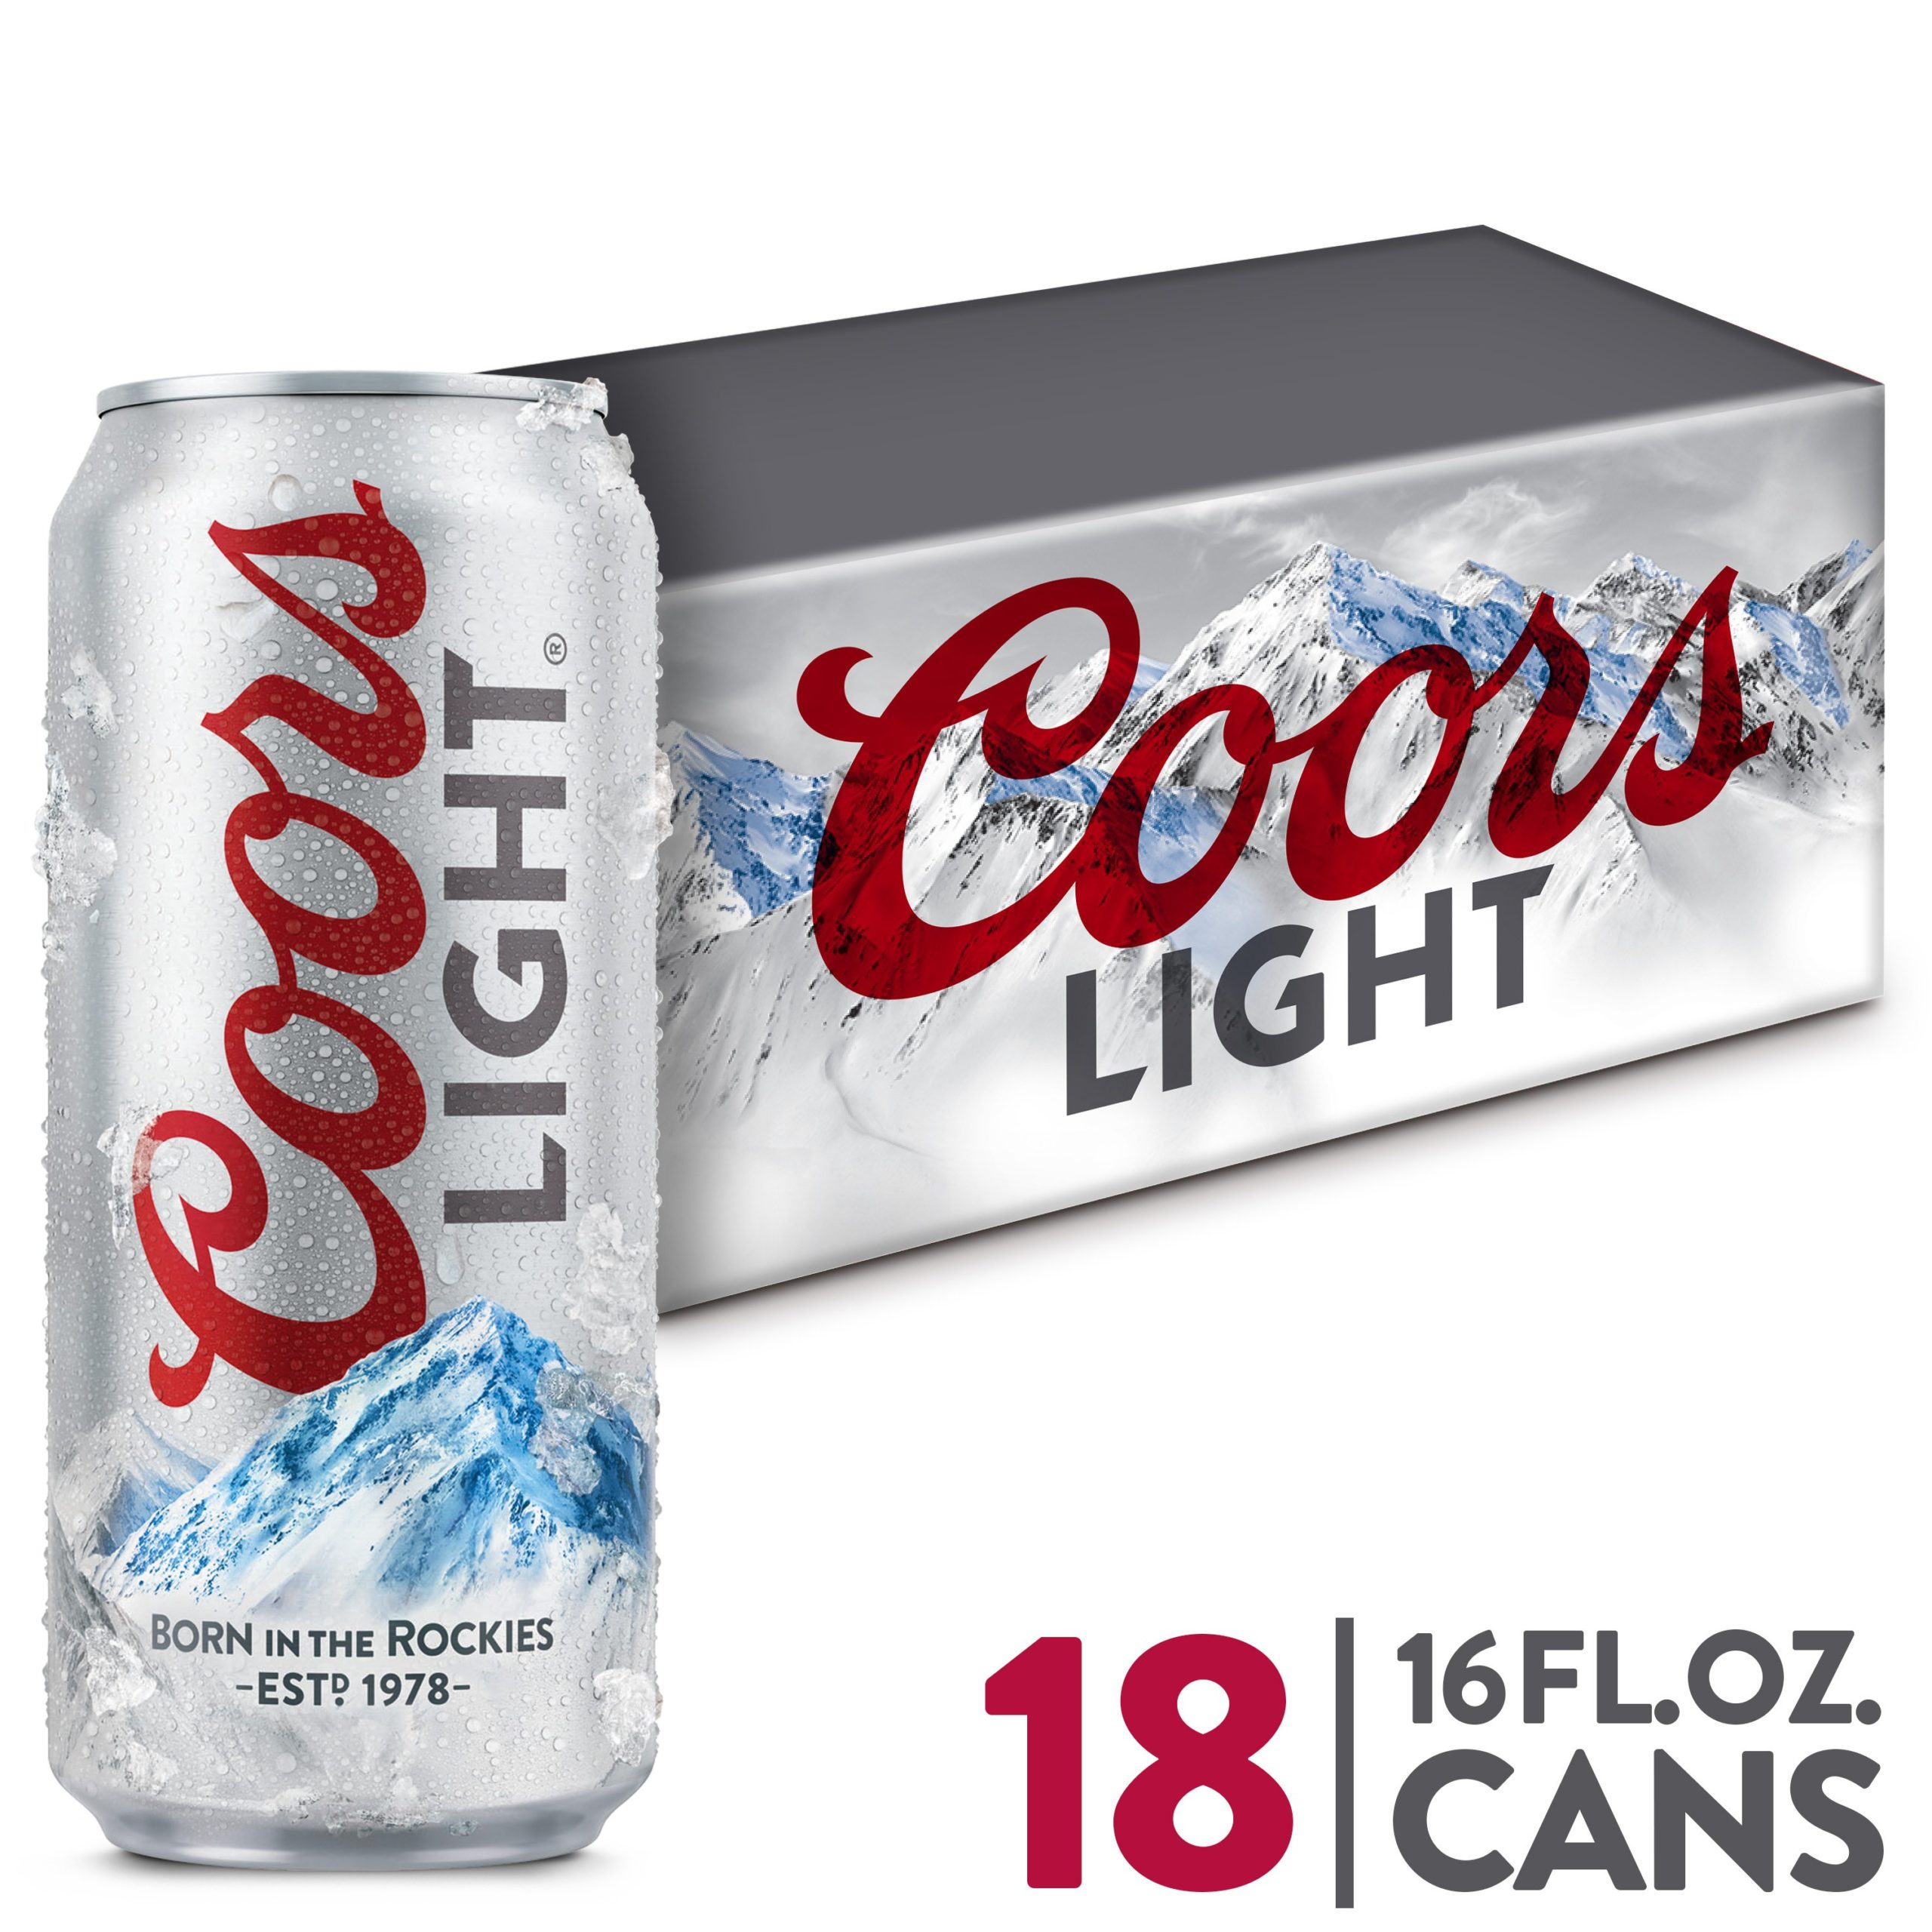 2 Silver Bullet COORS LIGHT Stainless Steel KOOZIES, Red, Cans + Bottles  NEW!